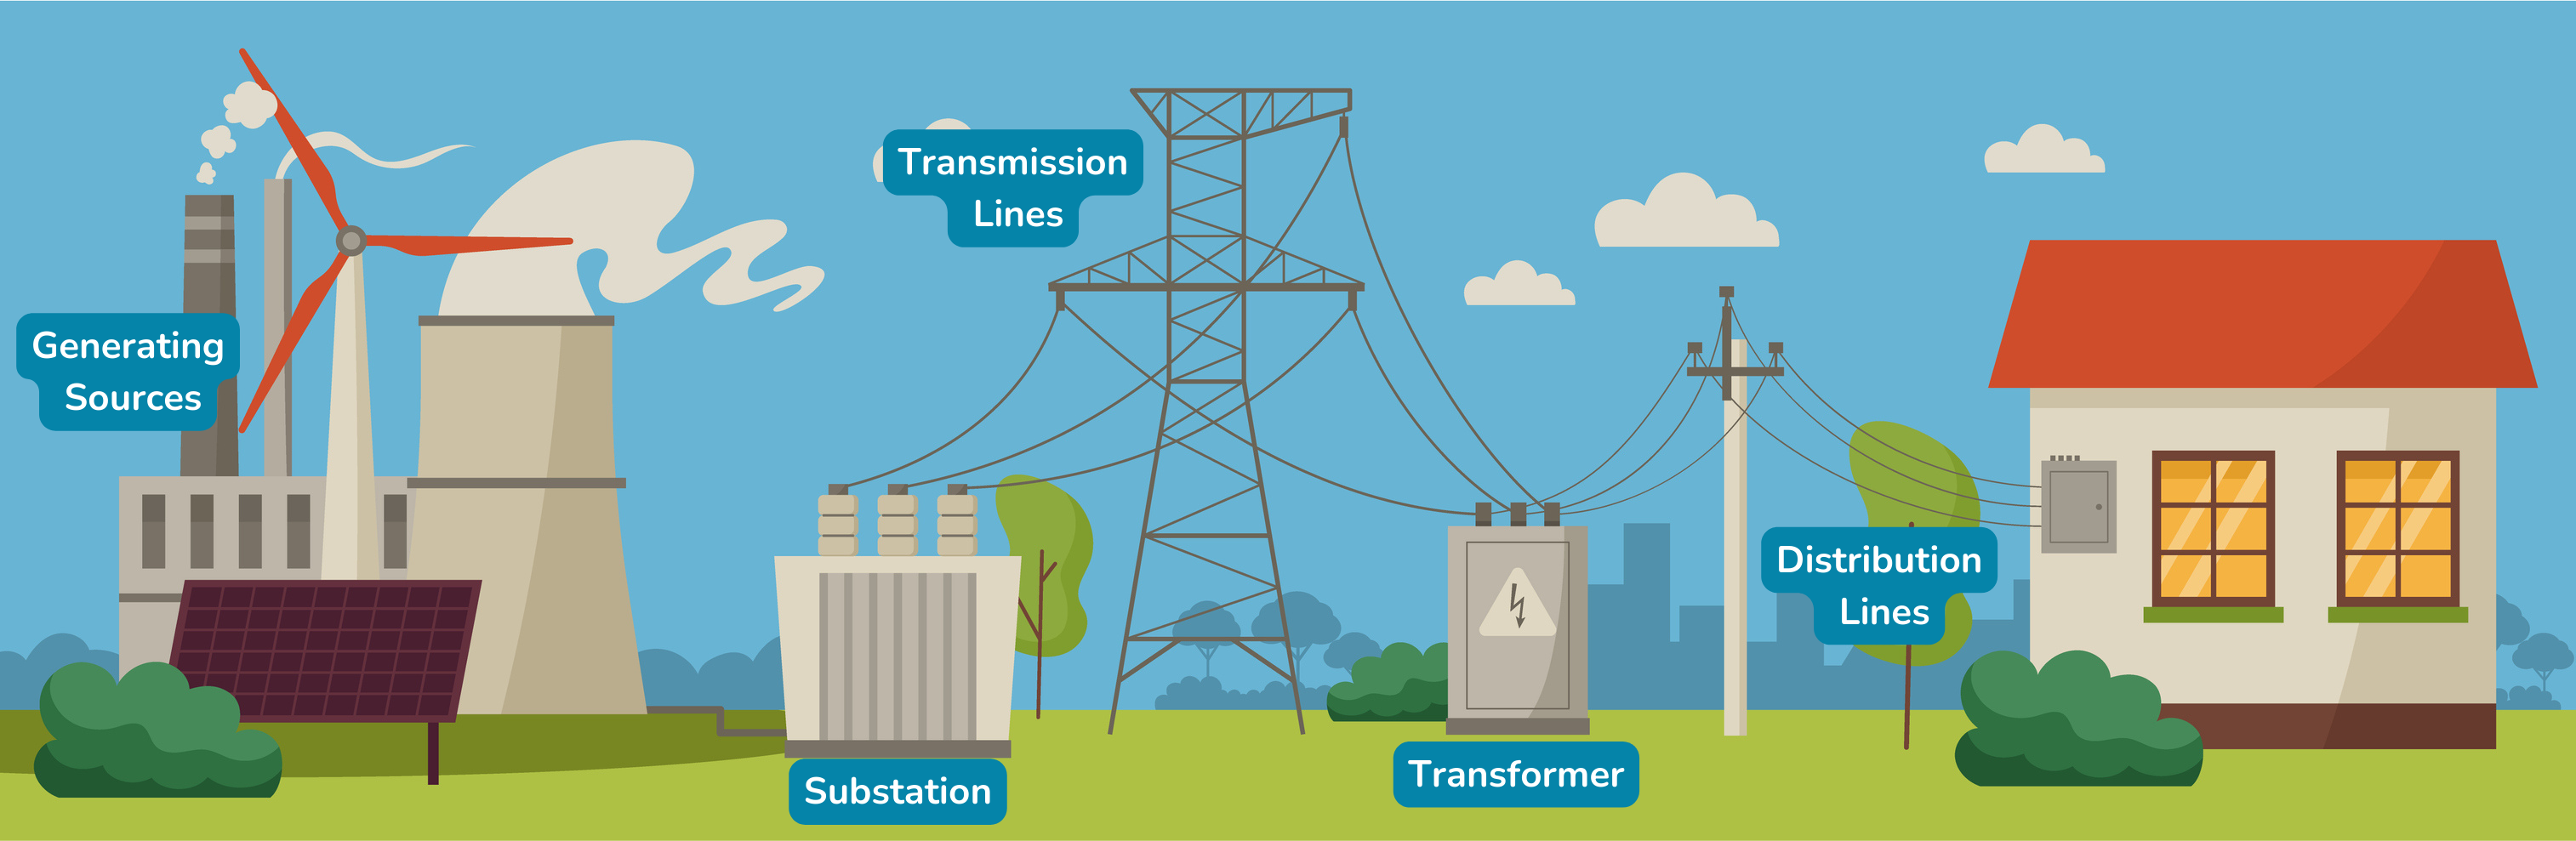 electric transmission and distribution system graphic showing generating sources, transmission lines, a substation, distribution lines and a transformer